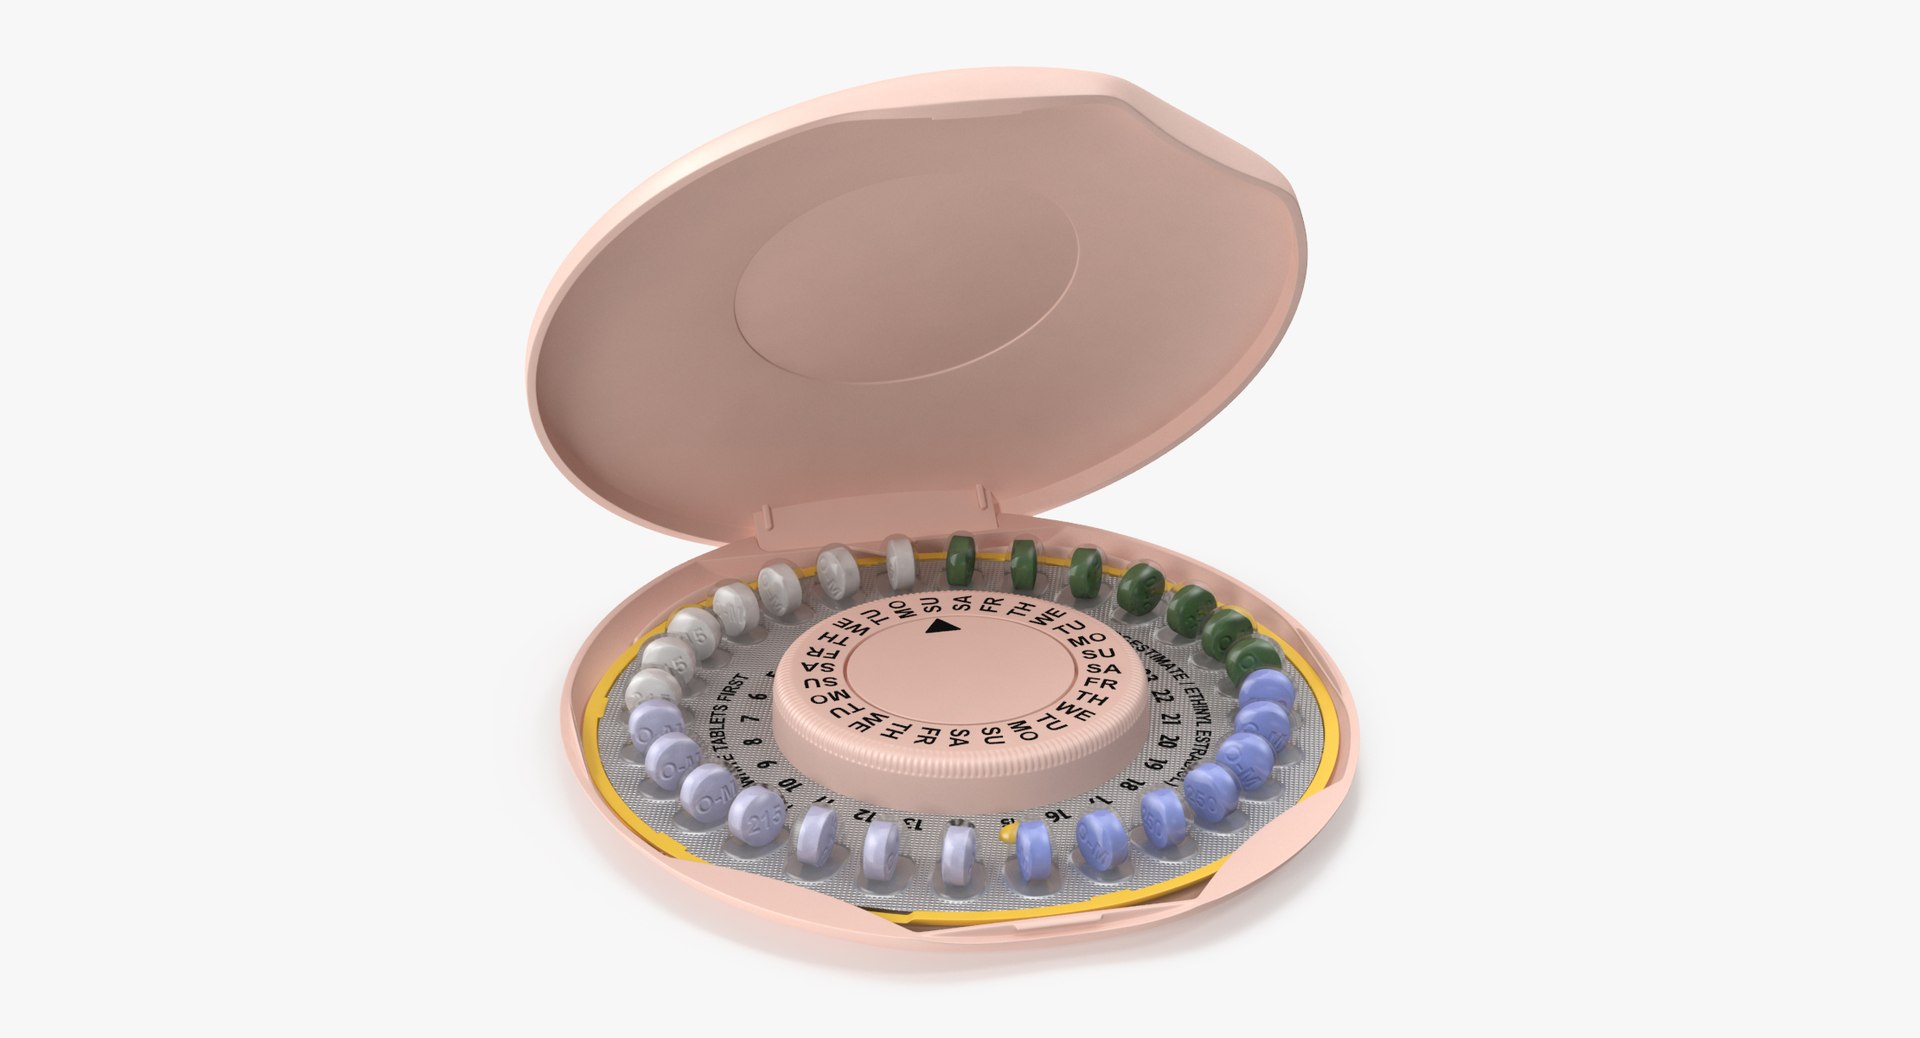 3d birth control pill package model